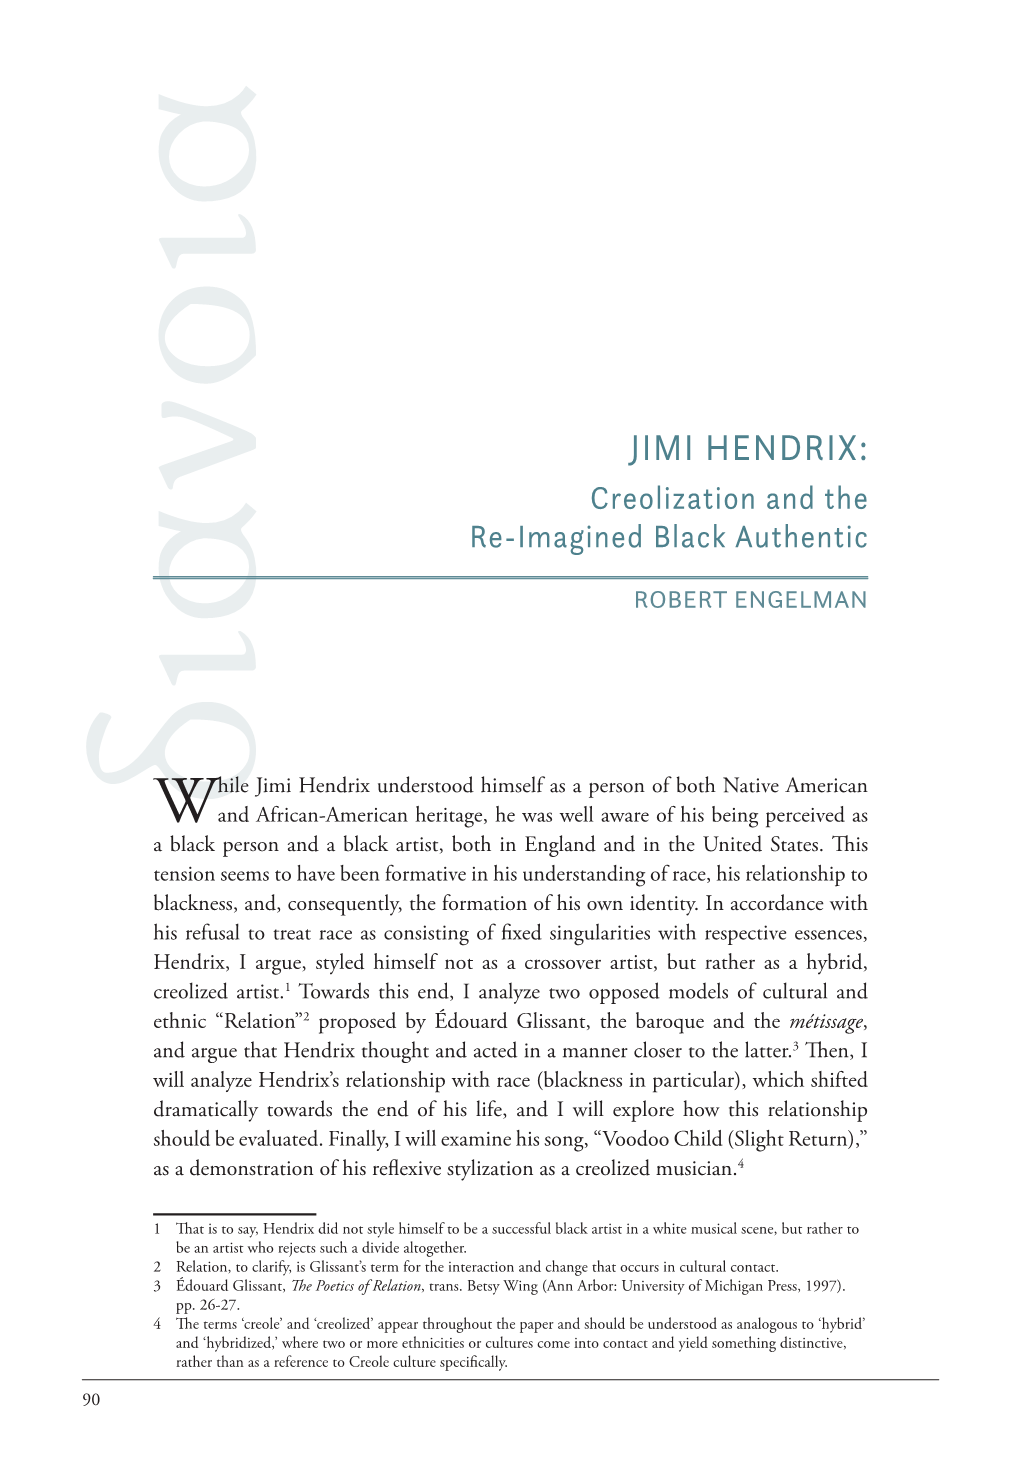 JIMI HENDRIX: Creolization and the Re-Imagined Black Authentic